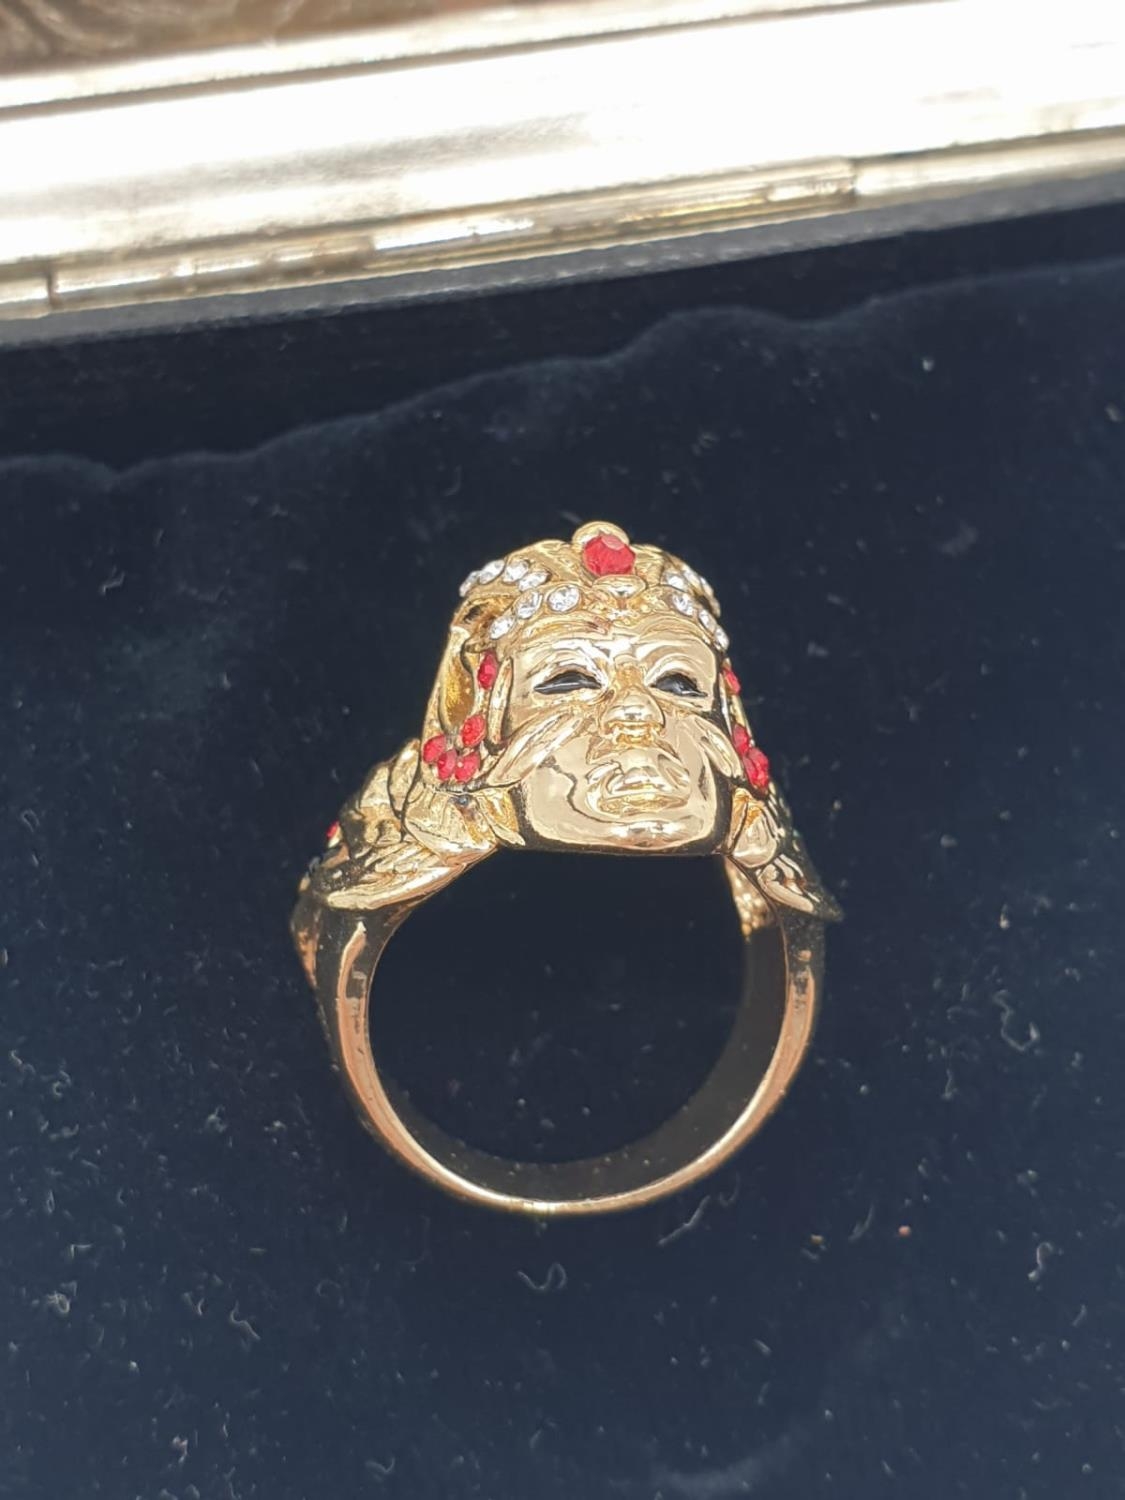 A ring depicting a Venetian Carnival Mask and a pair of earrings in a metal, Renaissance style - Image 3 of 10